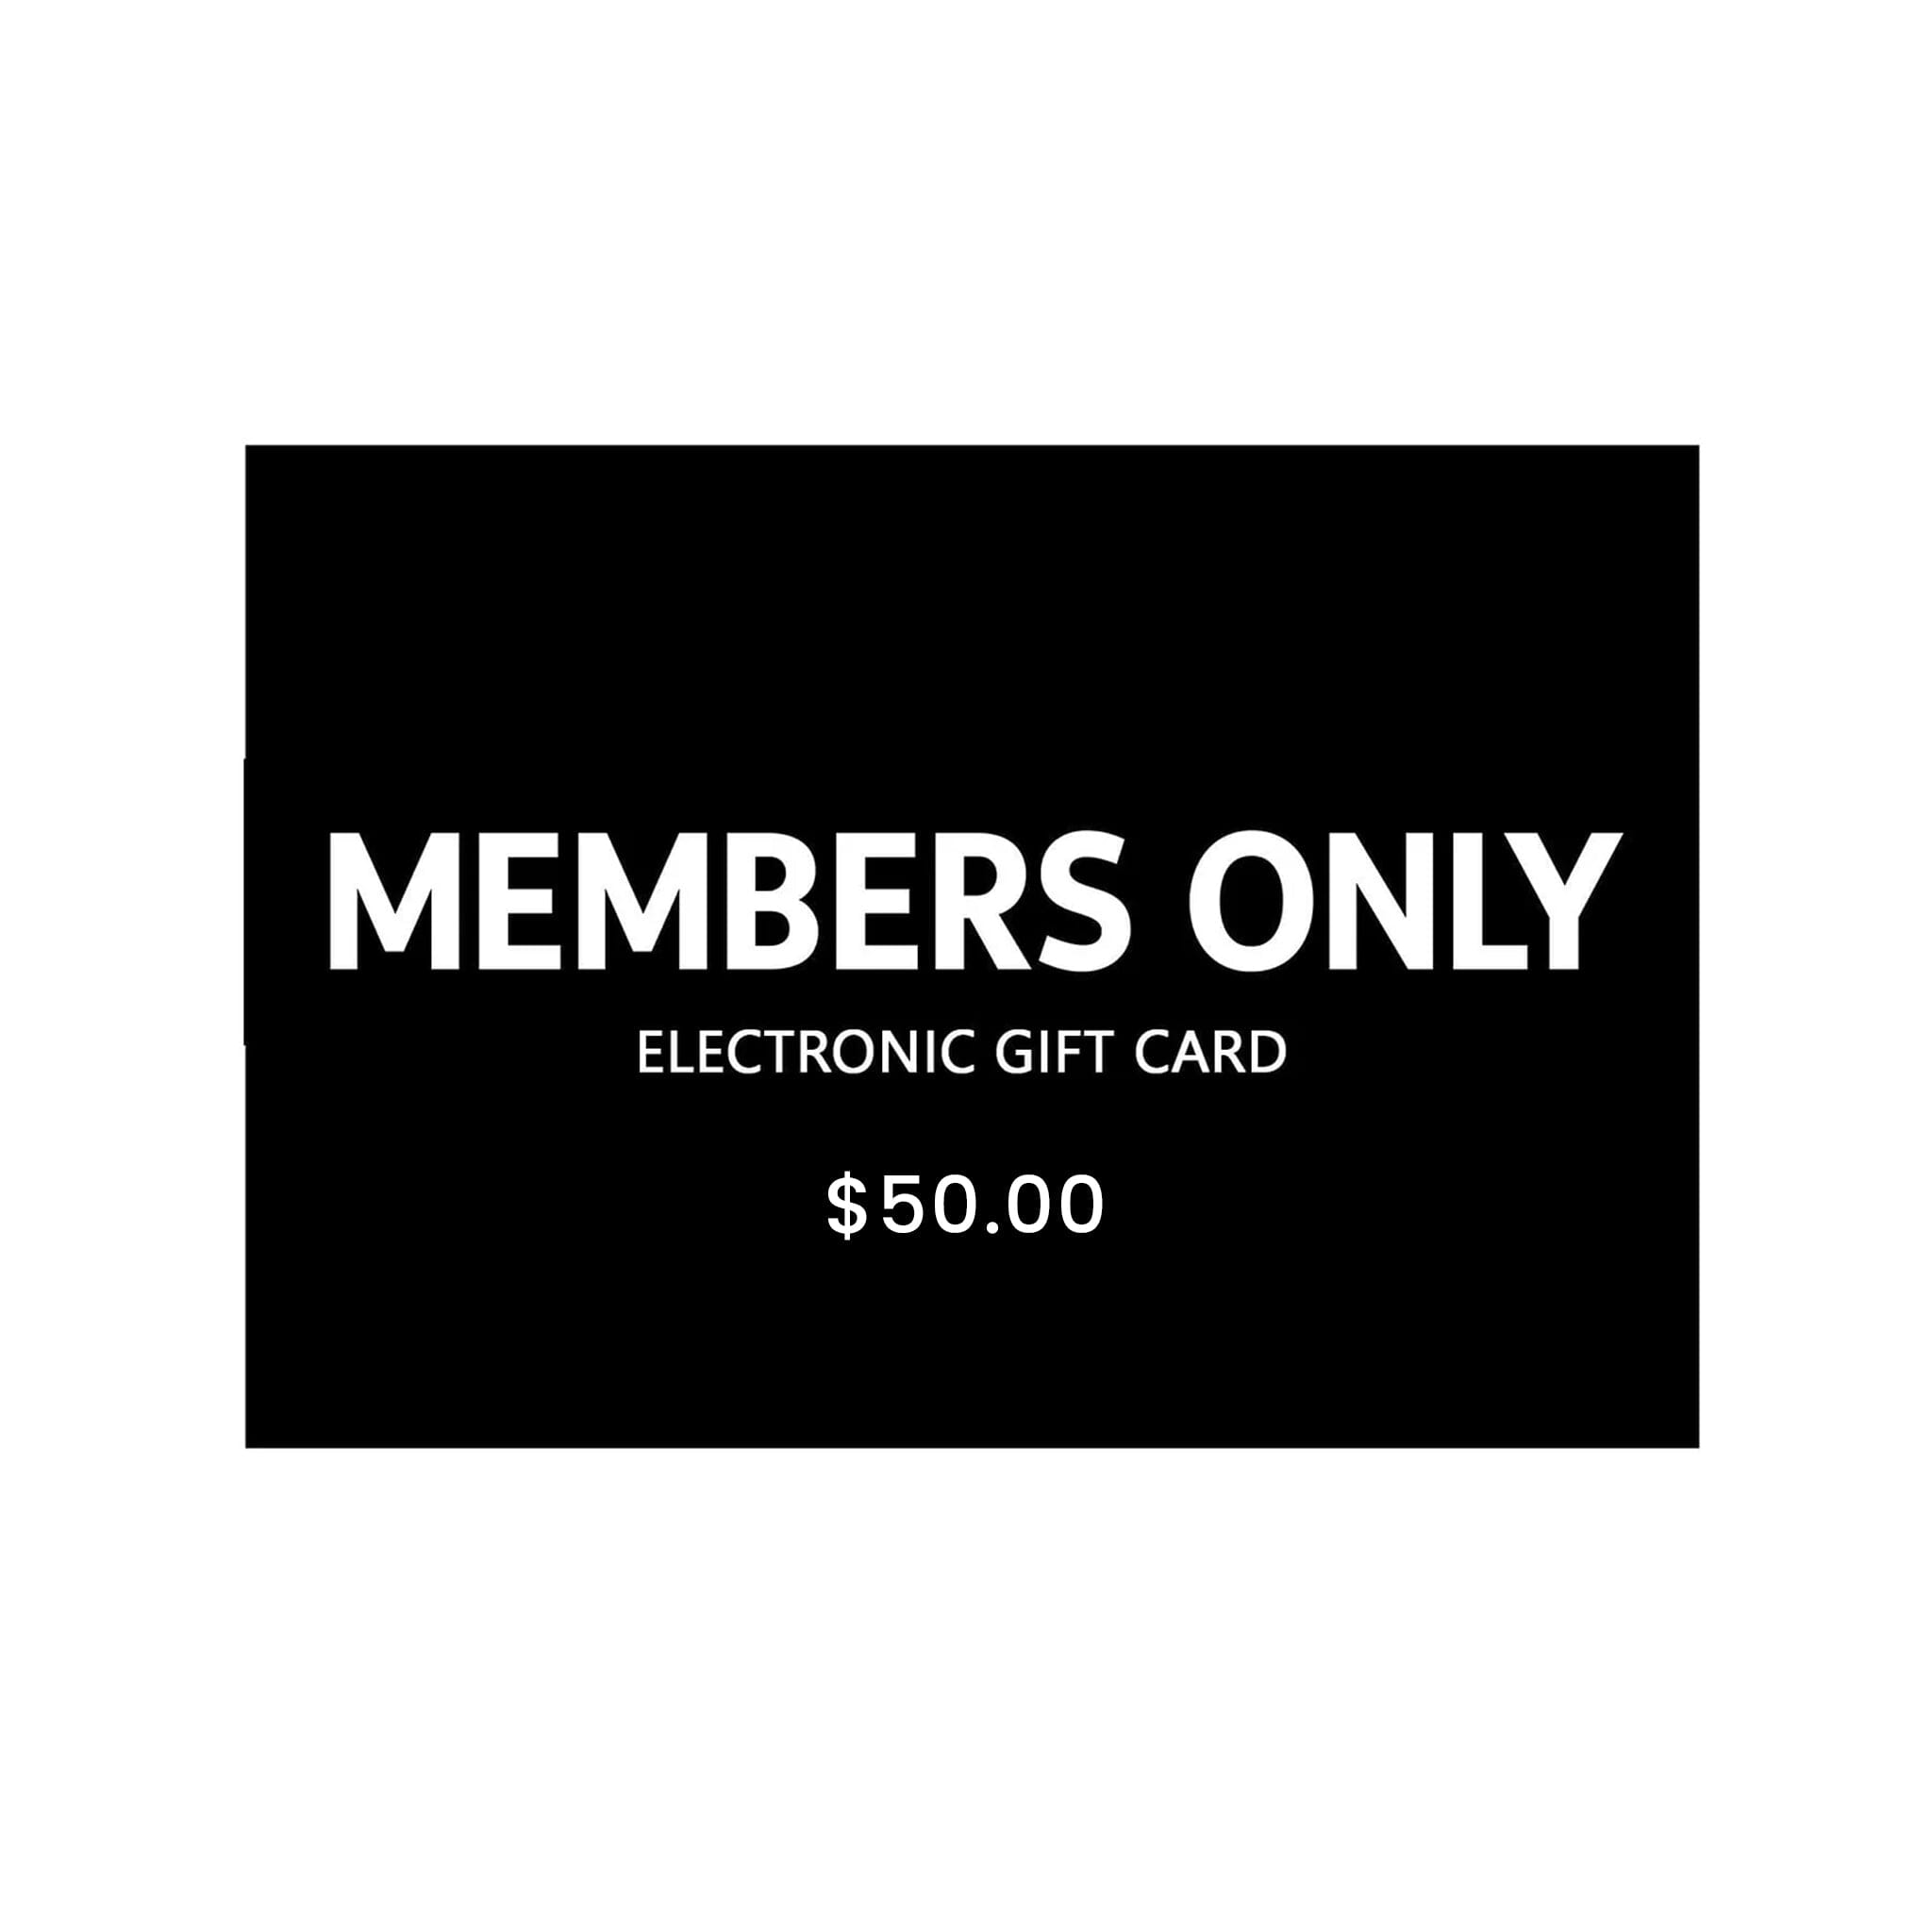 $50 Electronic Gift Card gift cards Members Only $50.00 